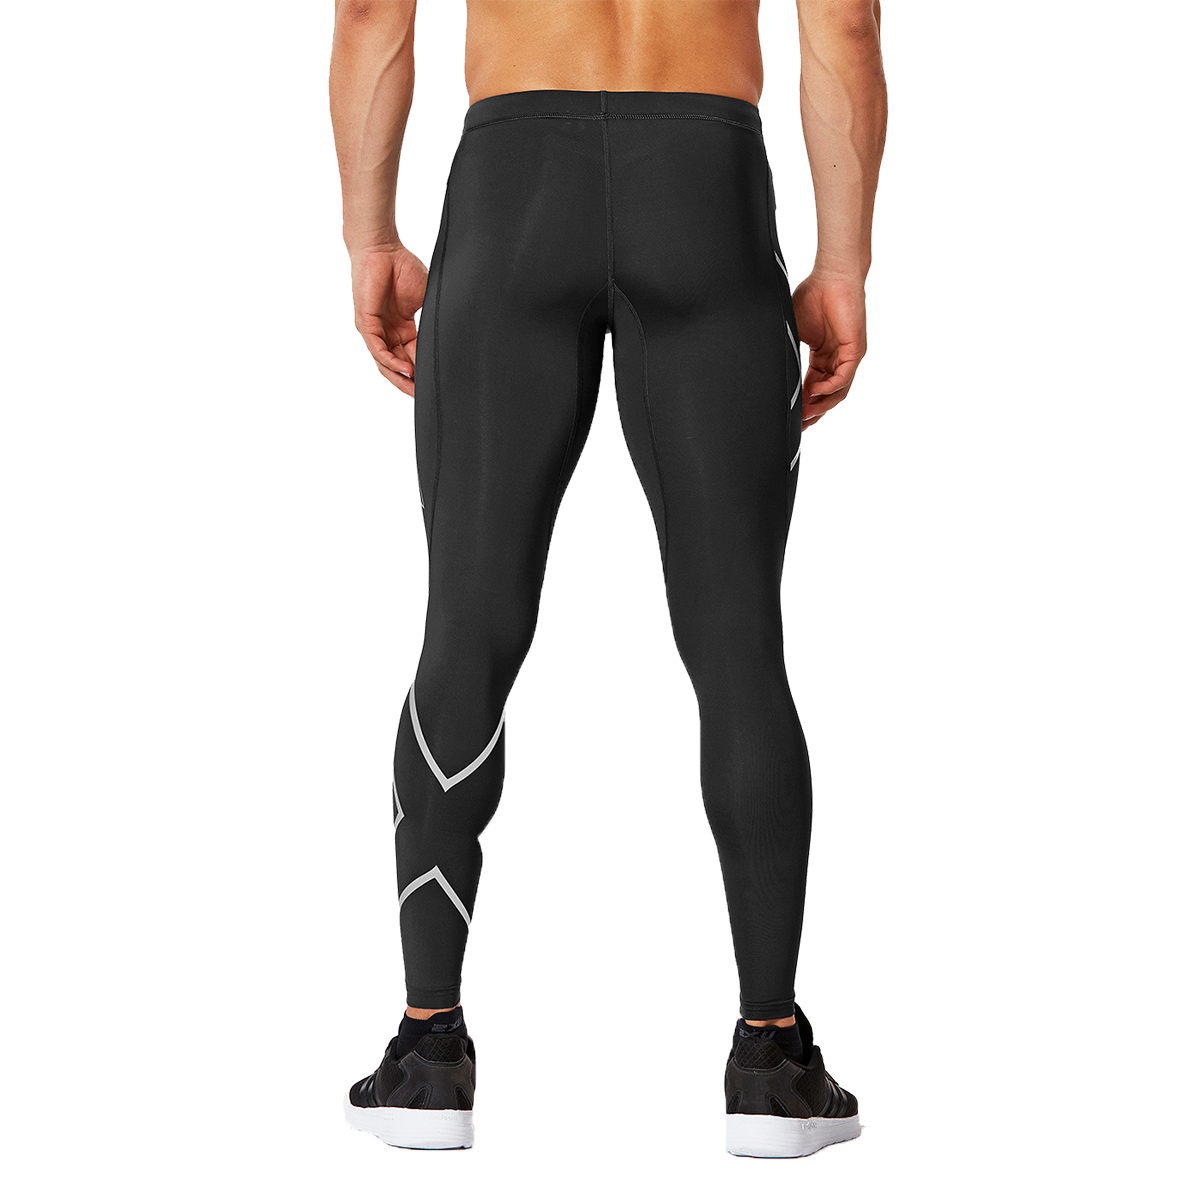 2XU Compression Tight, , large image number null